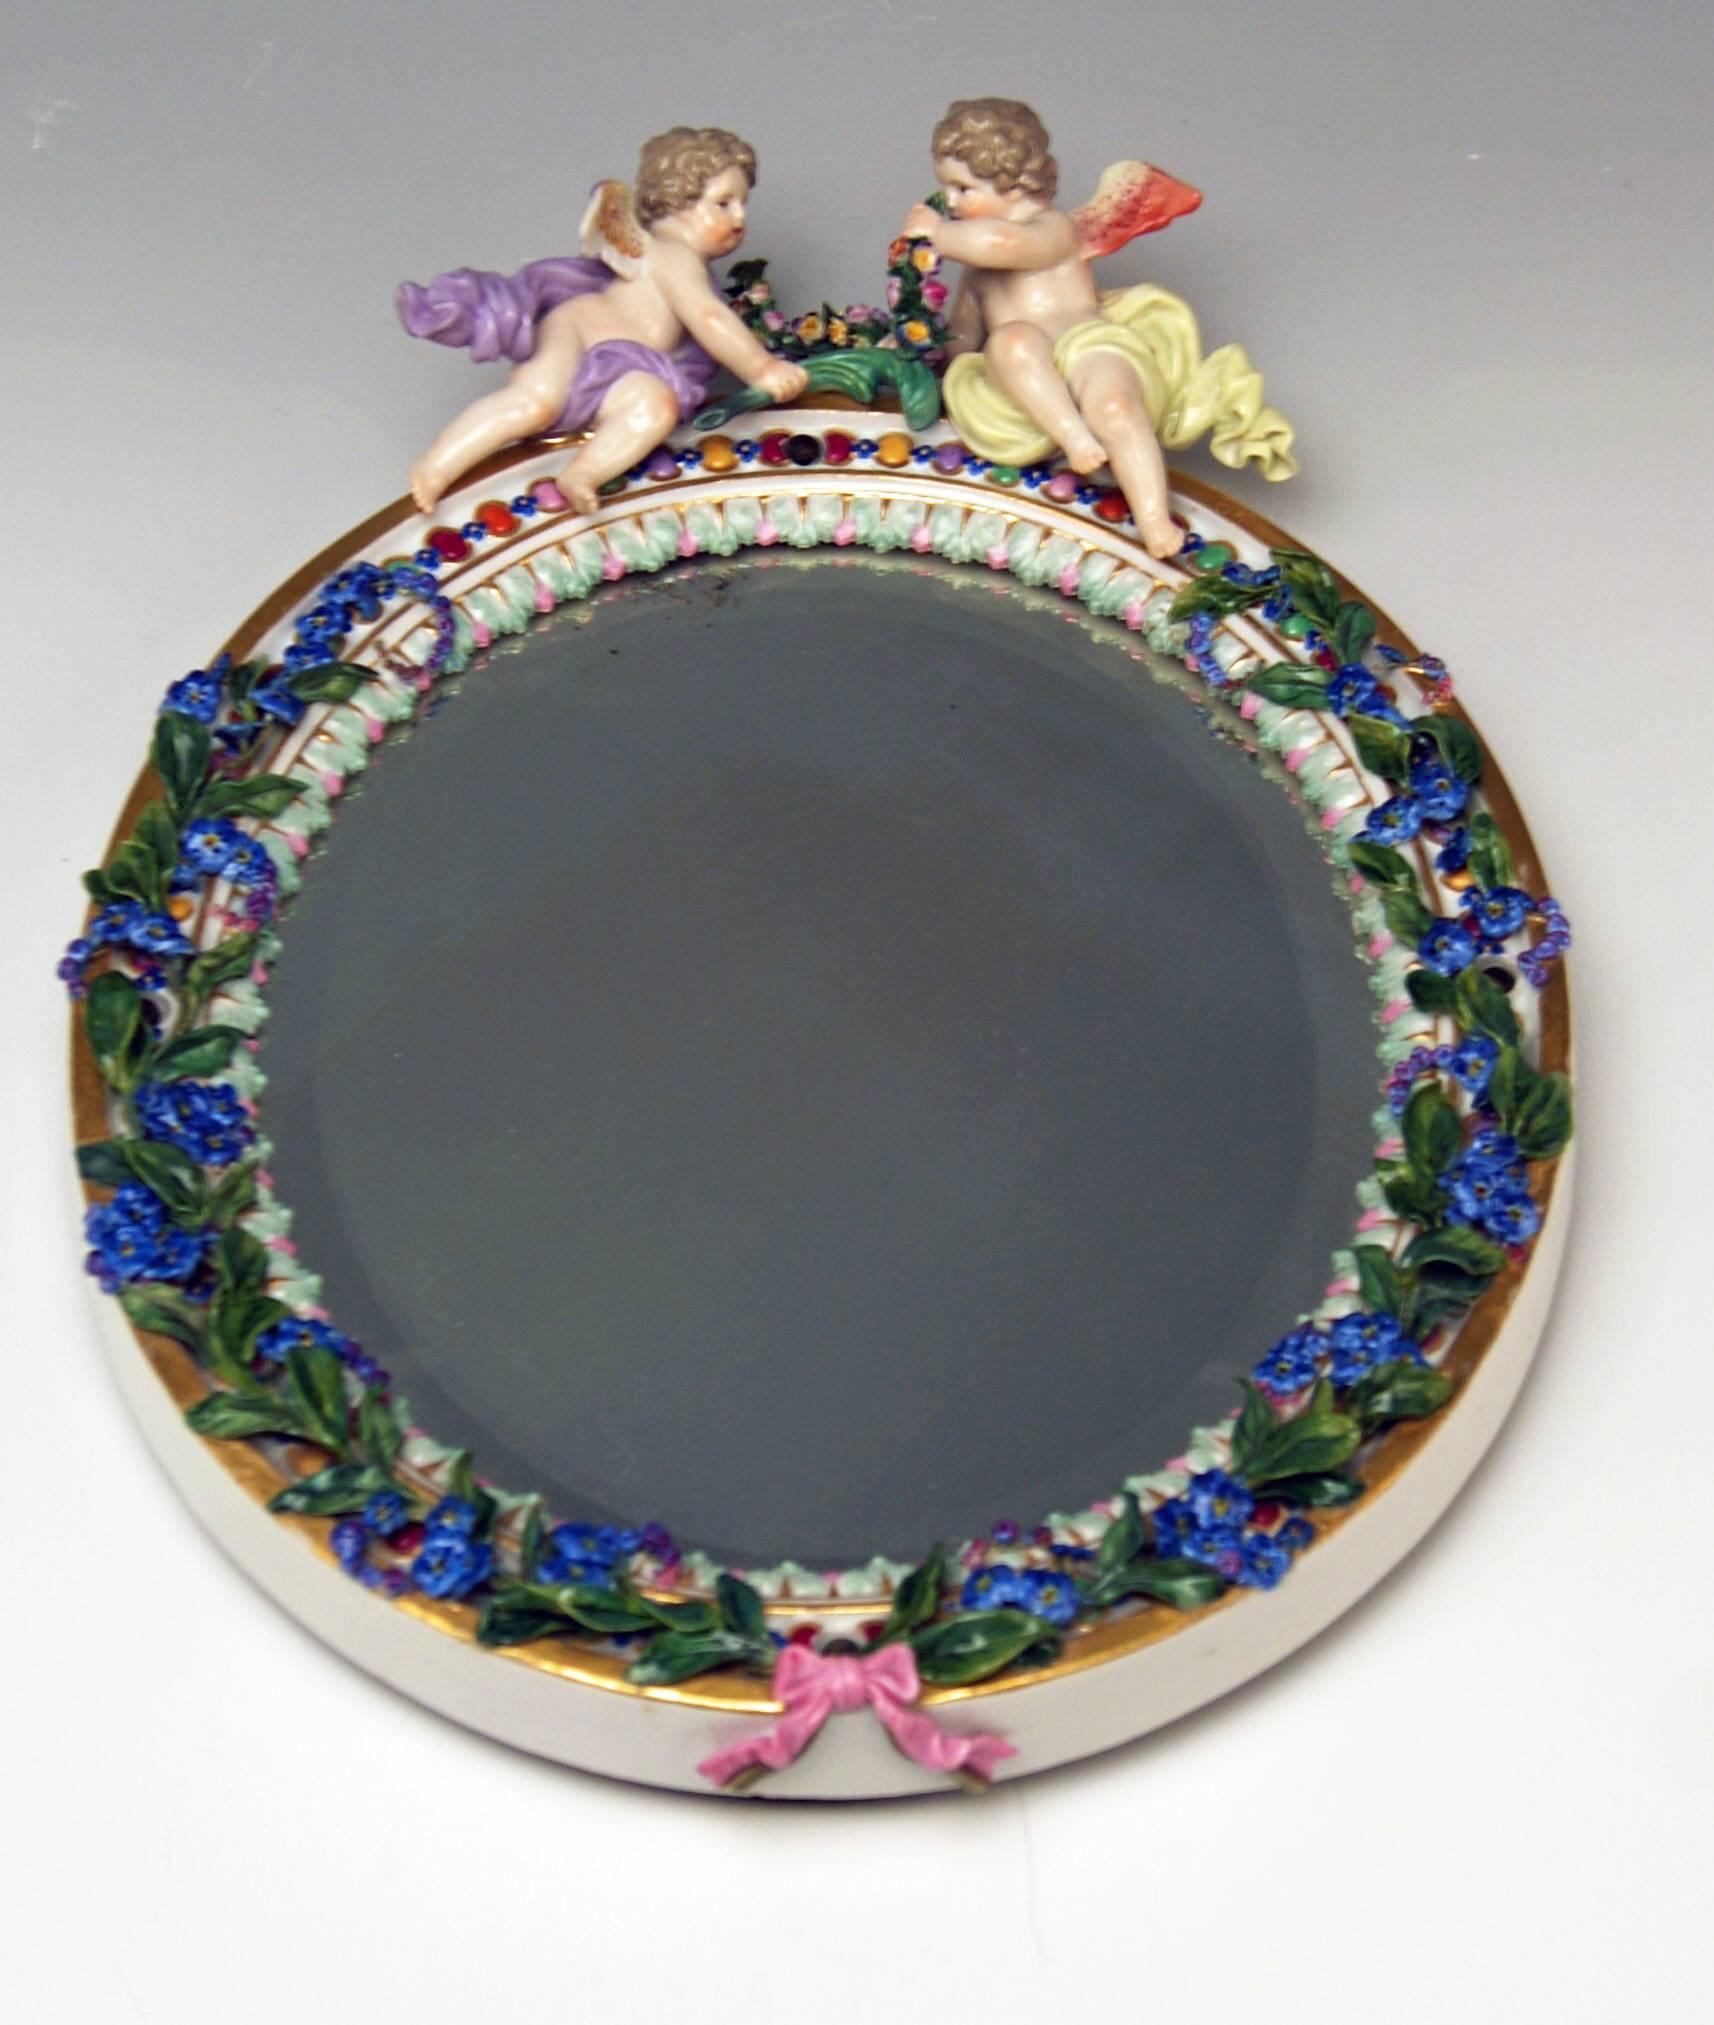 Meissen wall mirror with cherubs

Manufactory:  Meissen
Dating: 19th century / made circa 1870
Material: white porcelain , glossy finish
Technique: porcelain (modelled and fired) / multicolored painted

Item type:
Meissen stunning wall